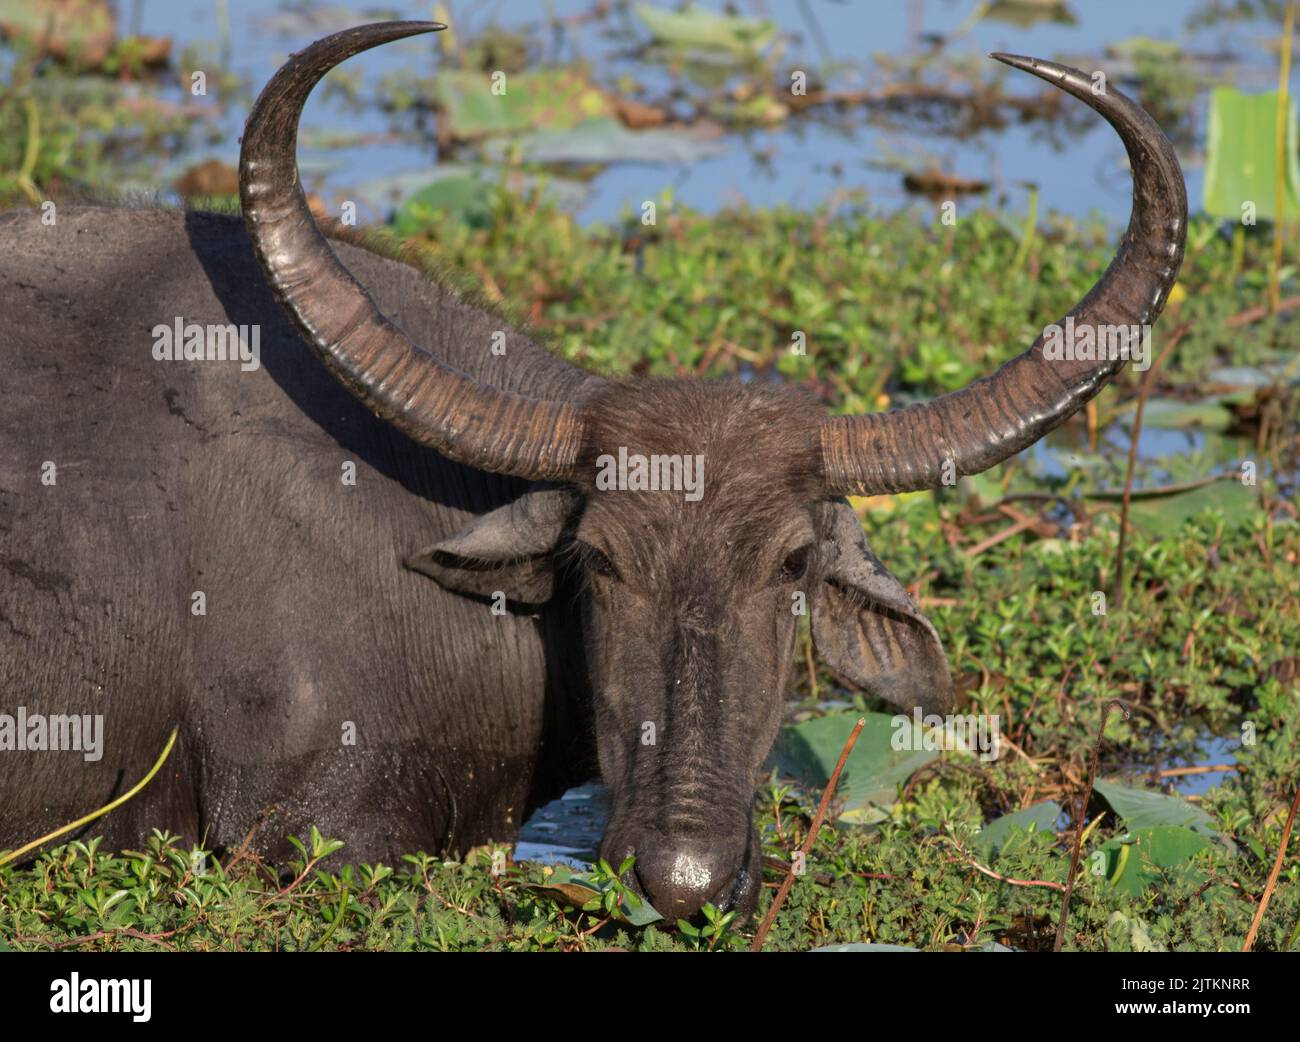 close up of a buffalo; buffalo close up; buffalo walking; cattle on grass Stock Photo